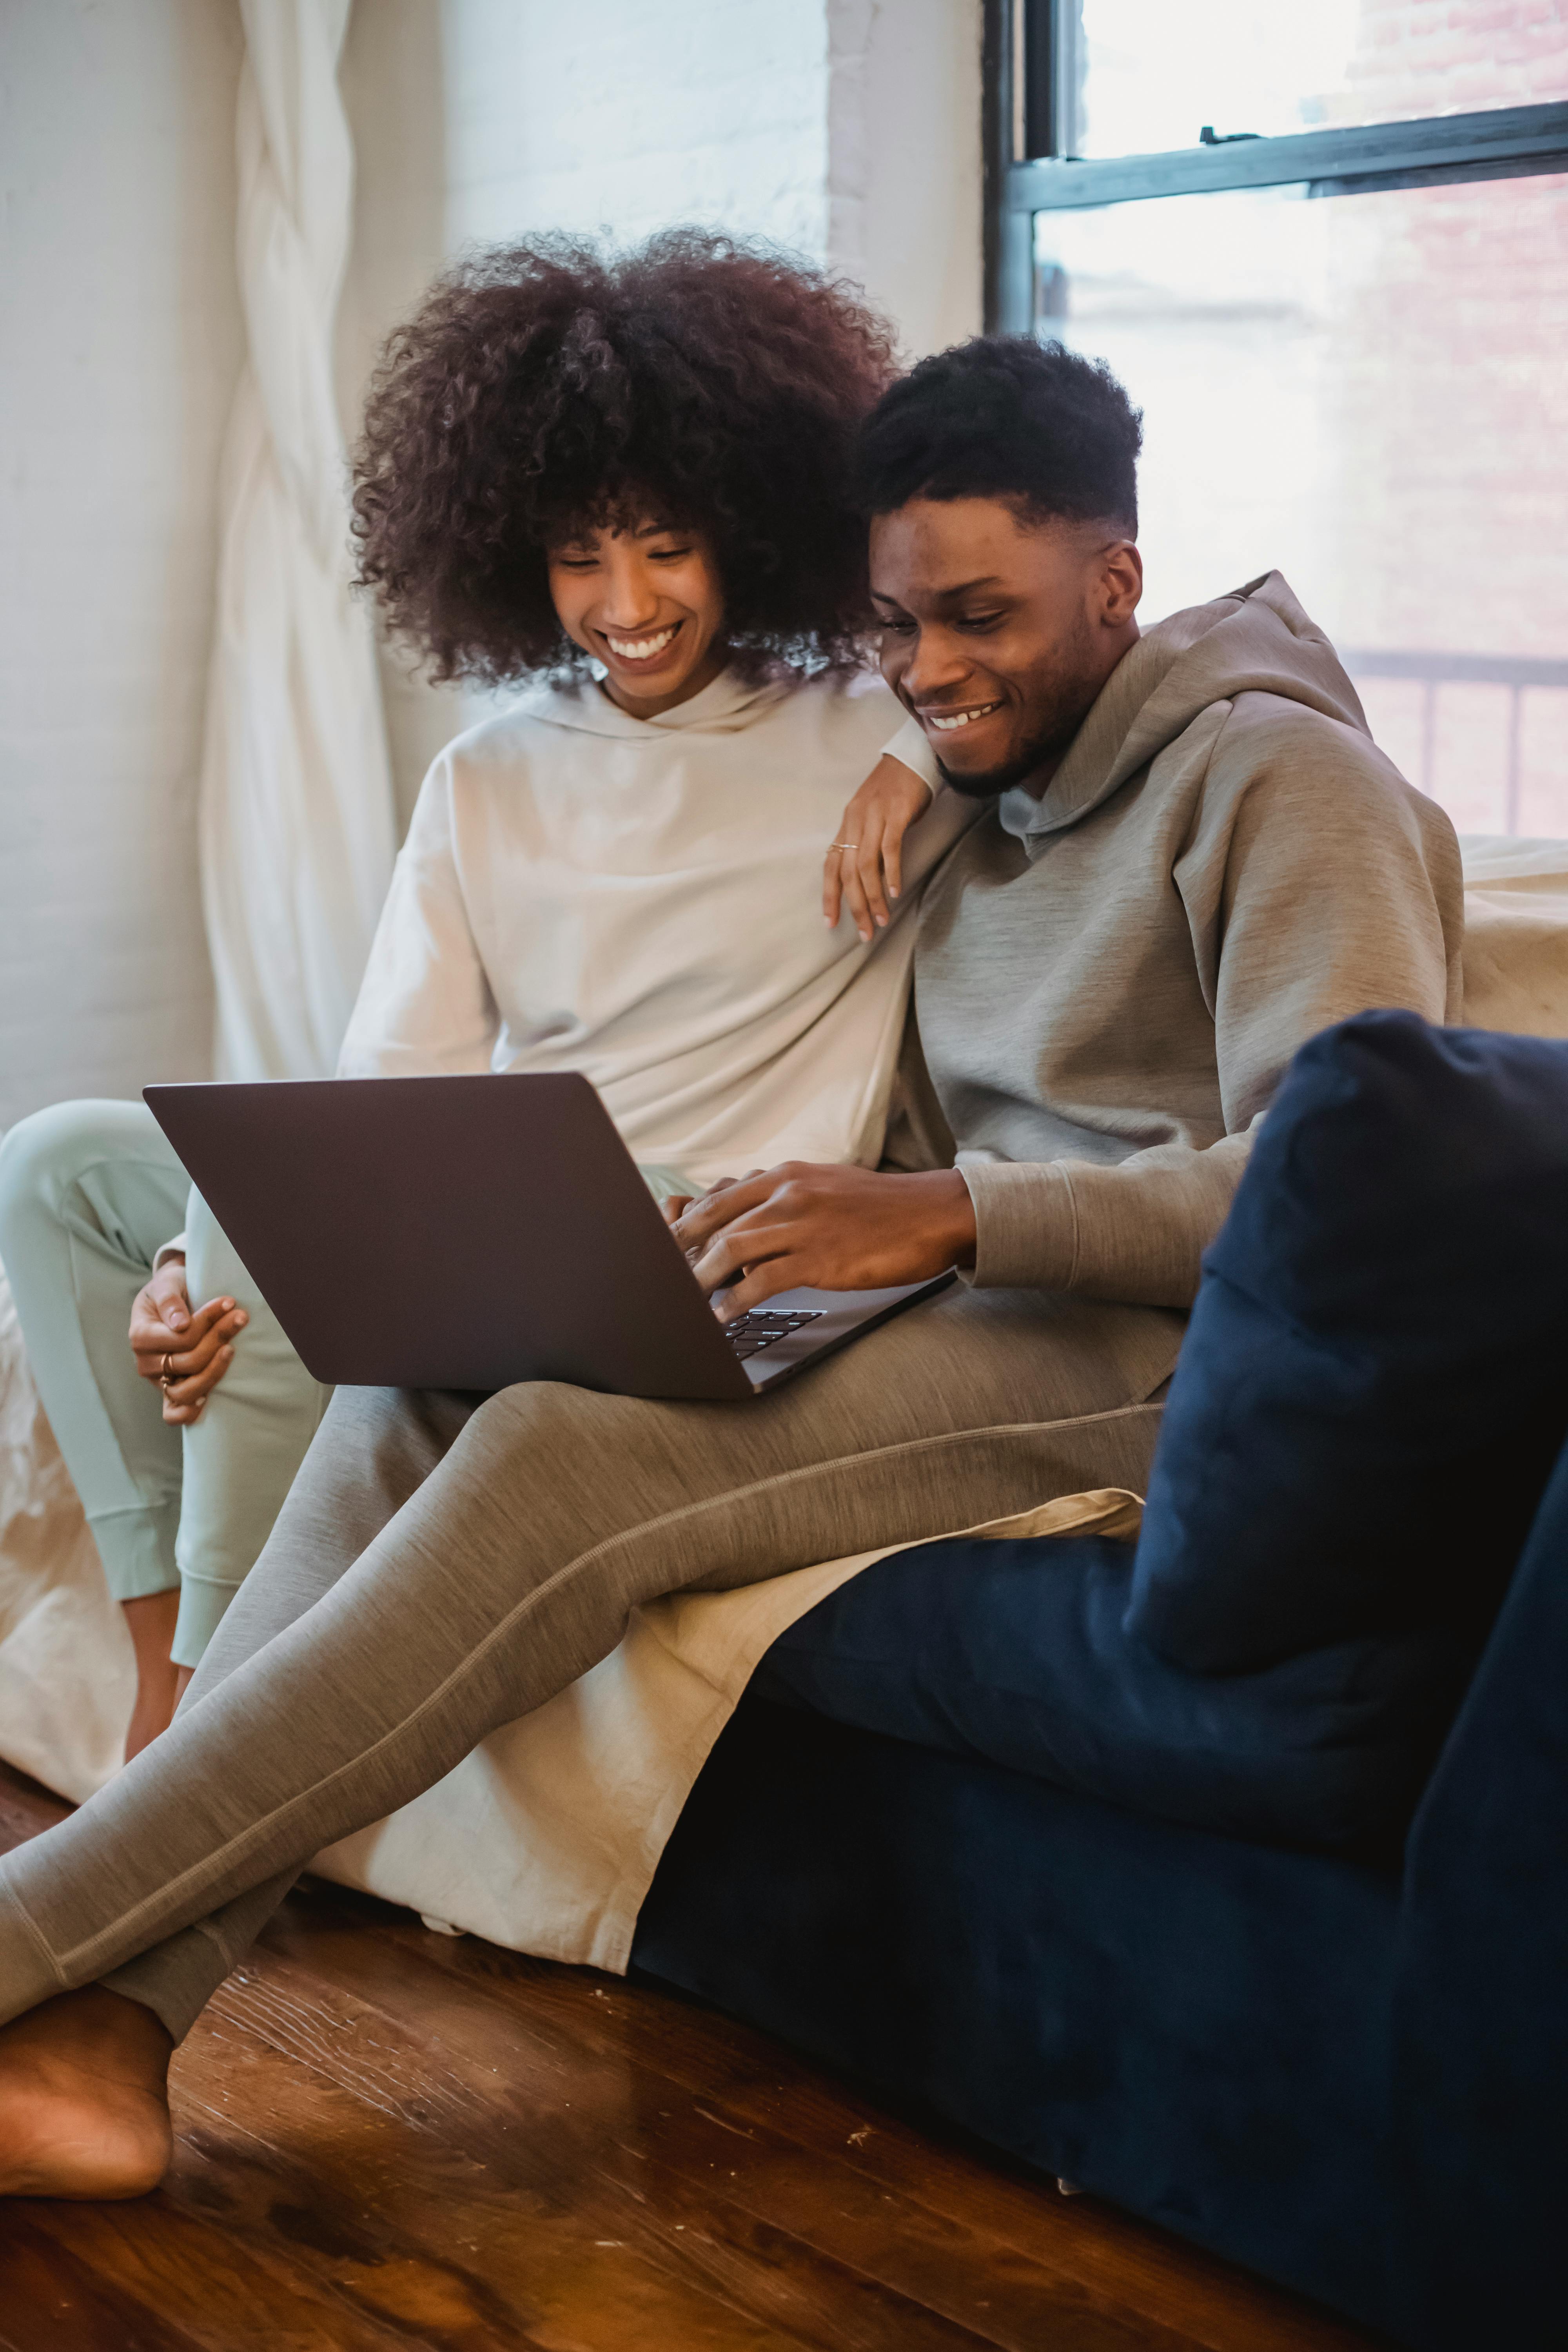 A happy couple on a video call on a laptop | Source: Pexels